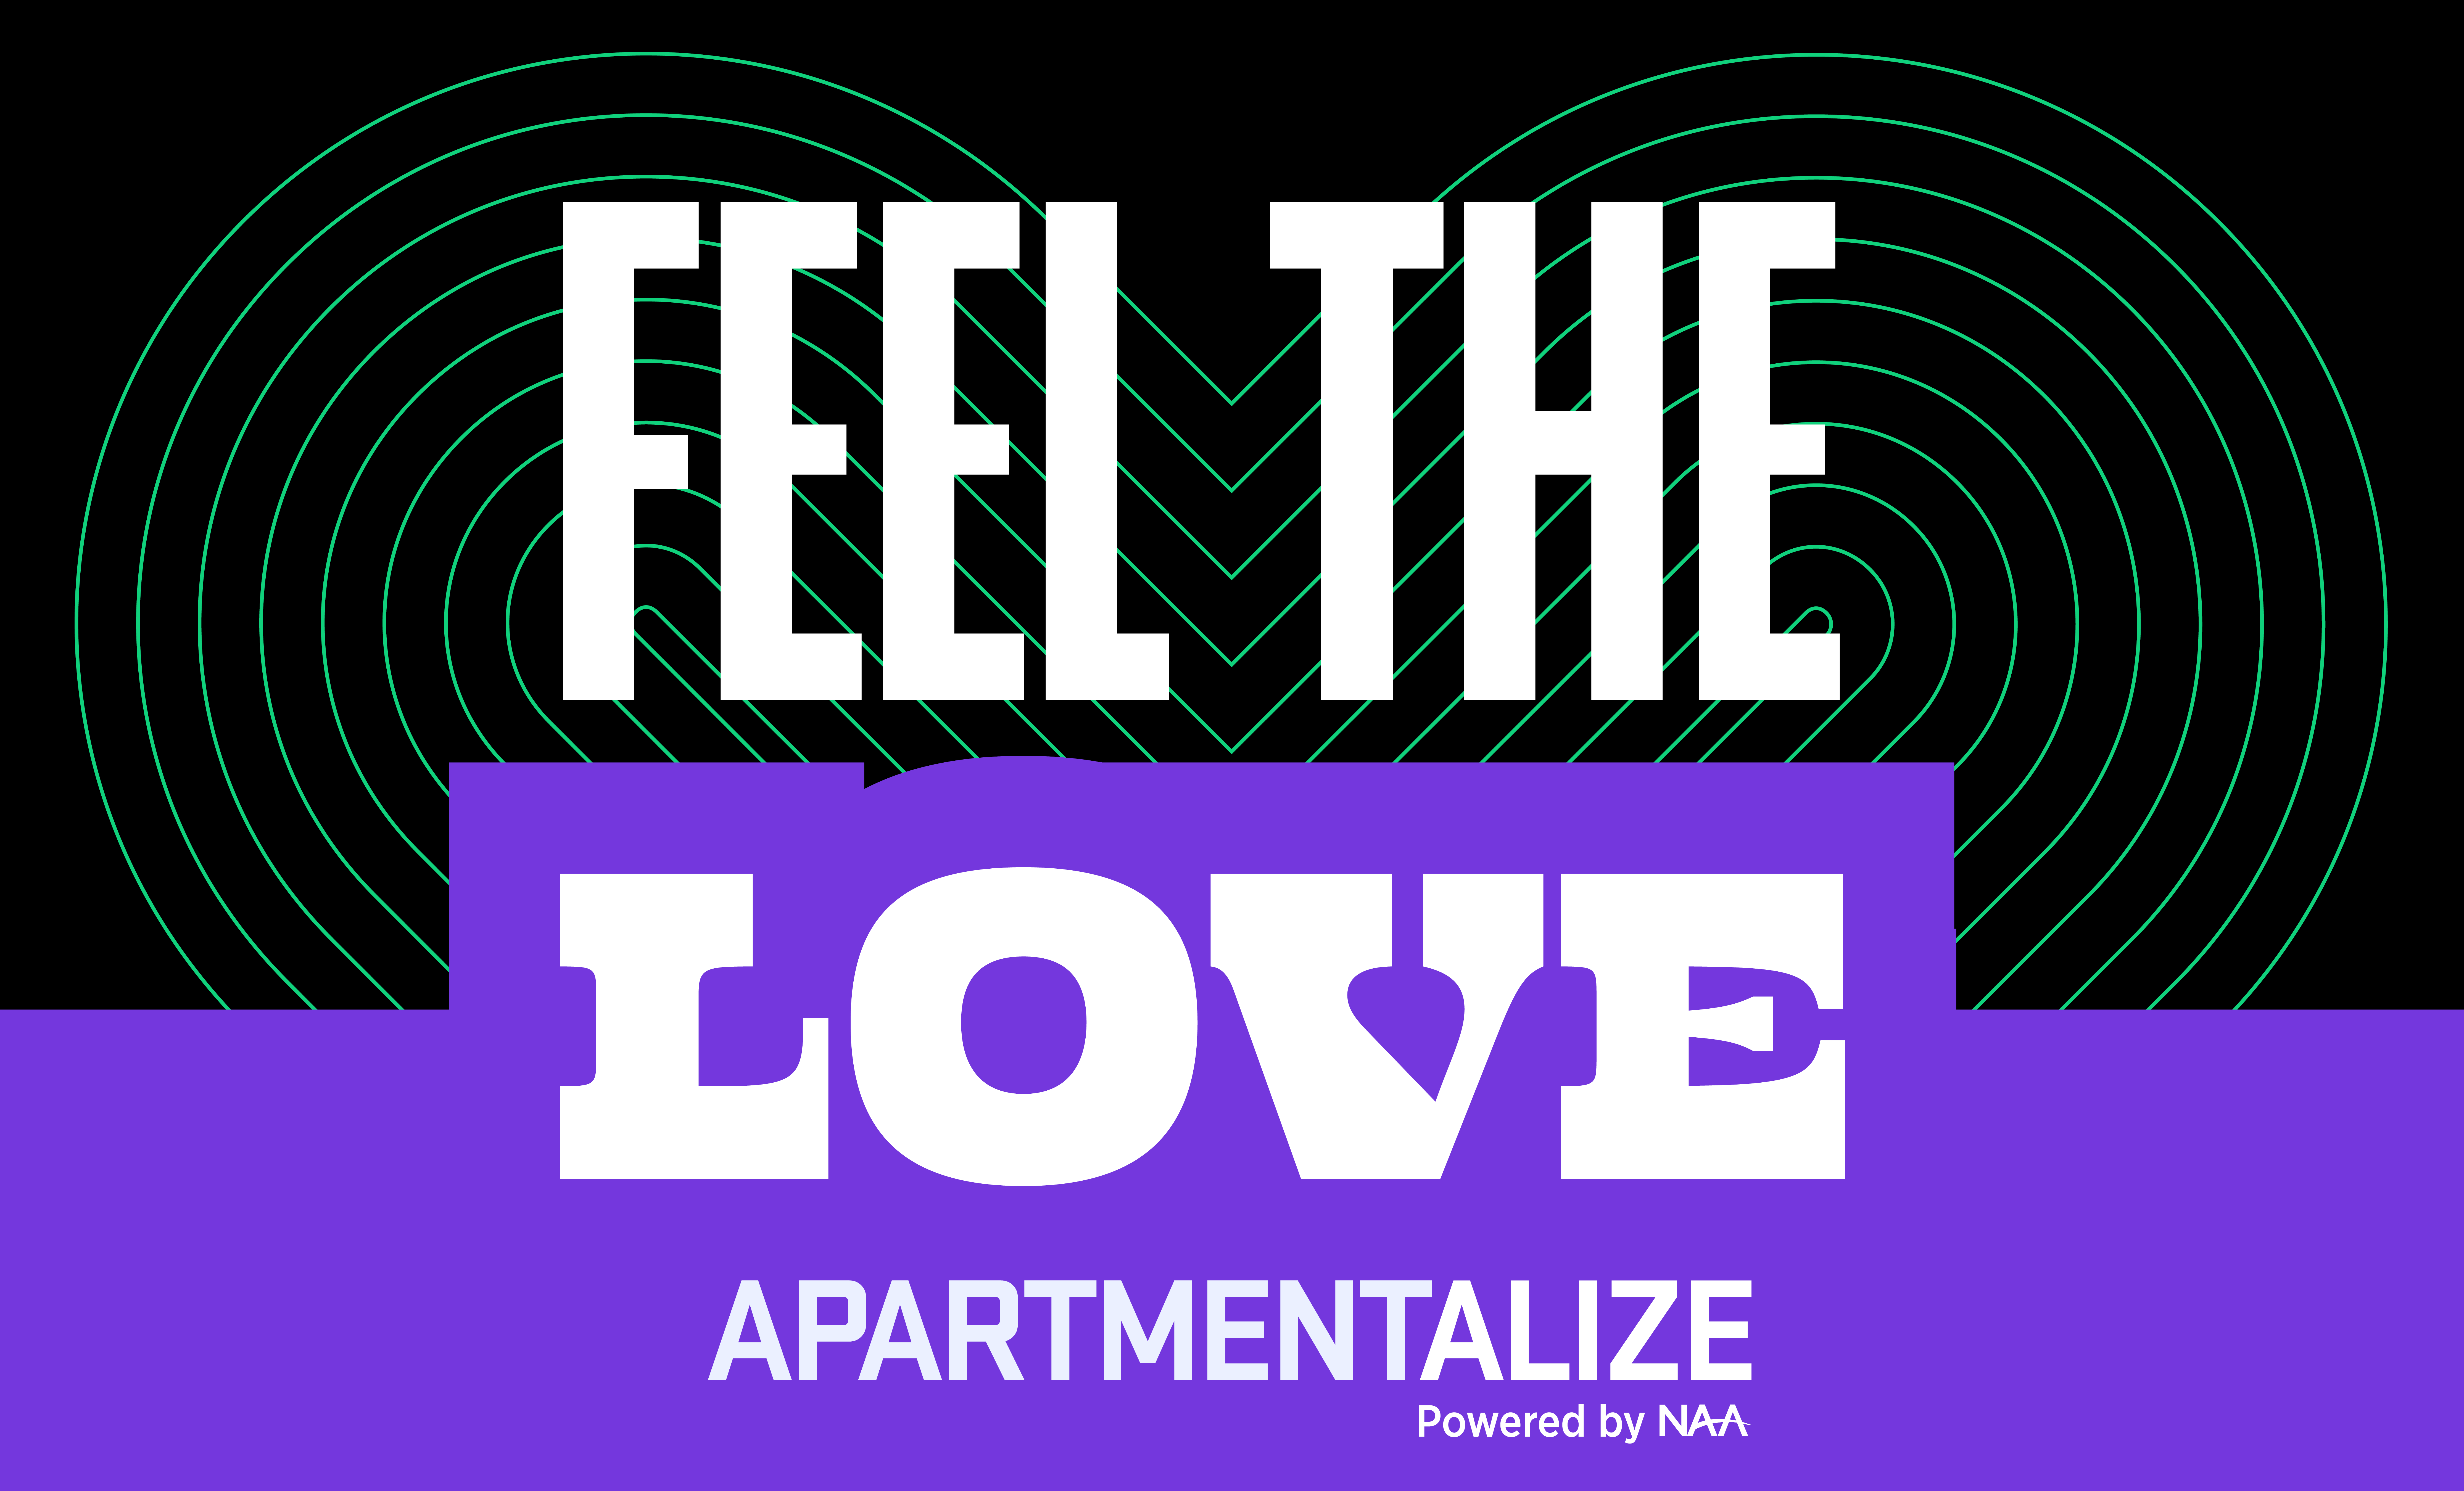 "Feel the Love" printed on black background with purple highlights